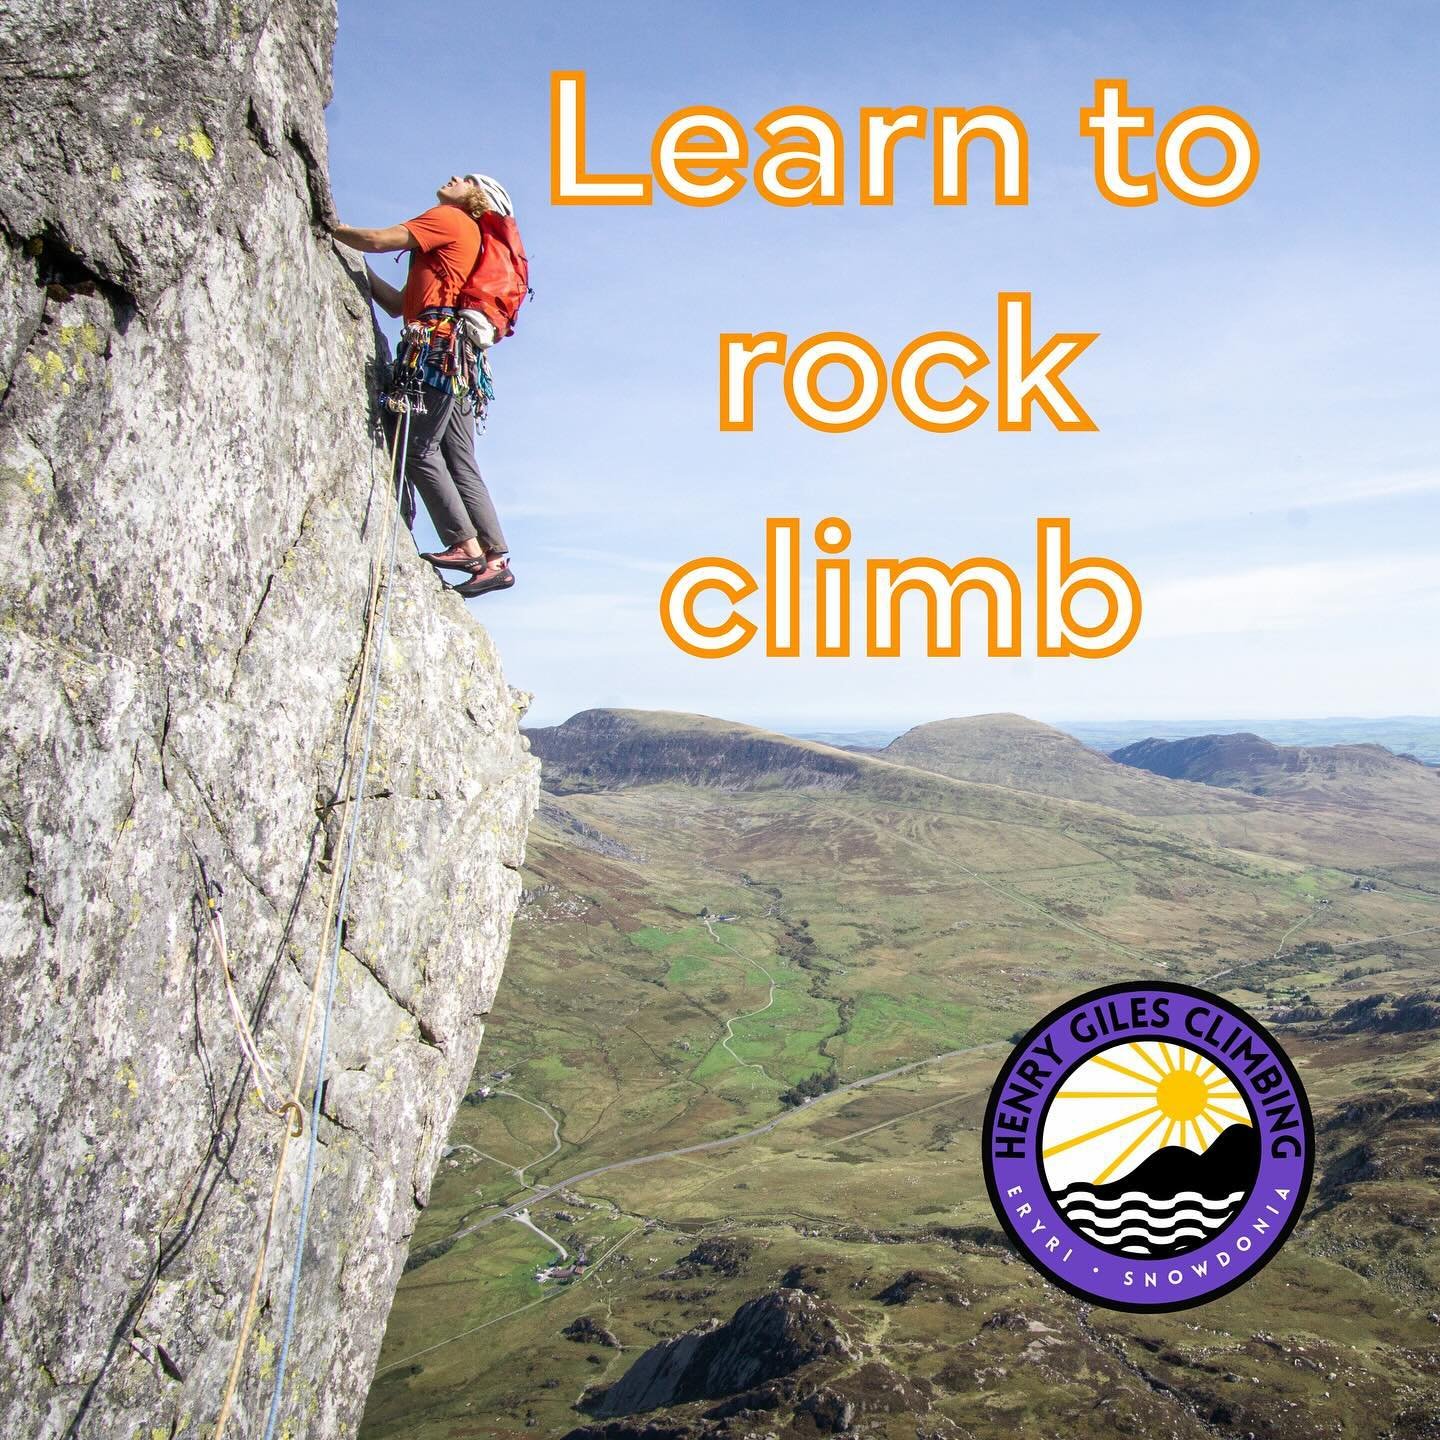 With summer just around the corner, it&rsquo;s a great time to book onto one of our courses. We offer bespoke rock climbing and scrambling courses in North Wales &amp; beyond. 

Whether you want to experience scrambling for the first time, climb abov